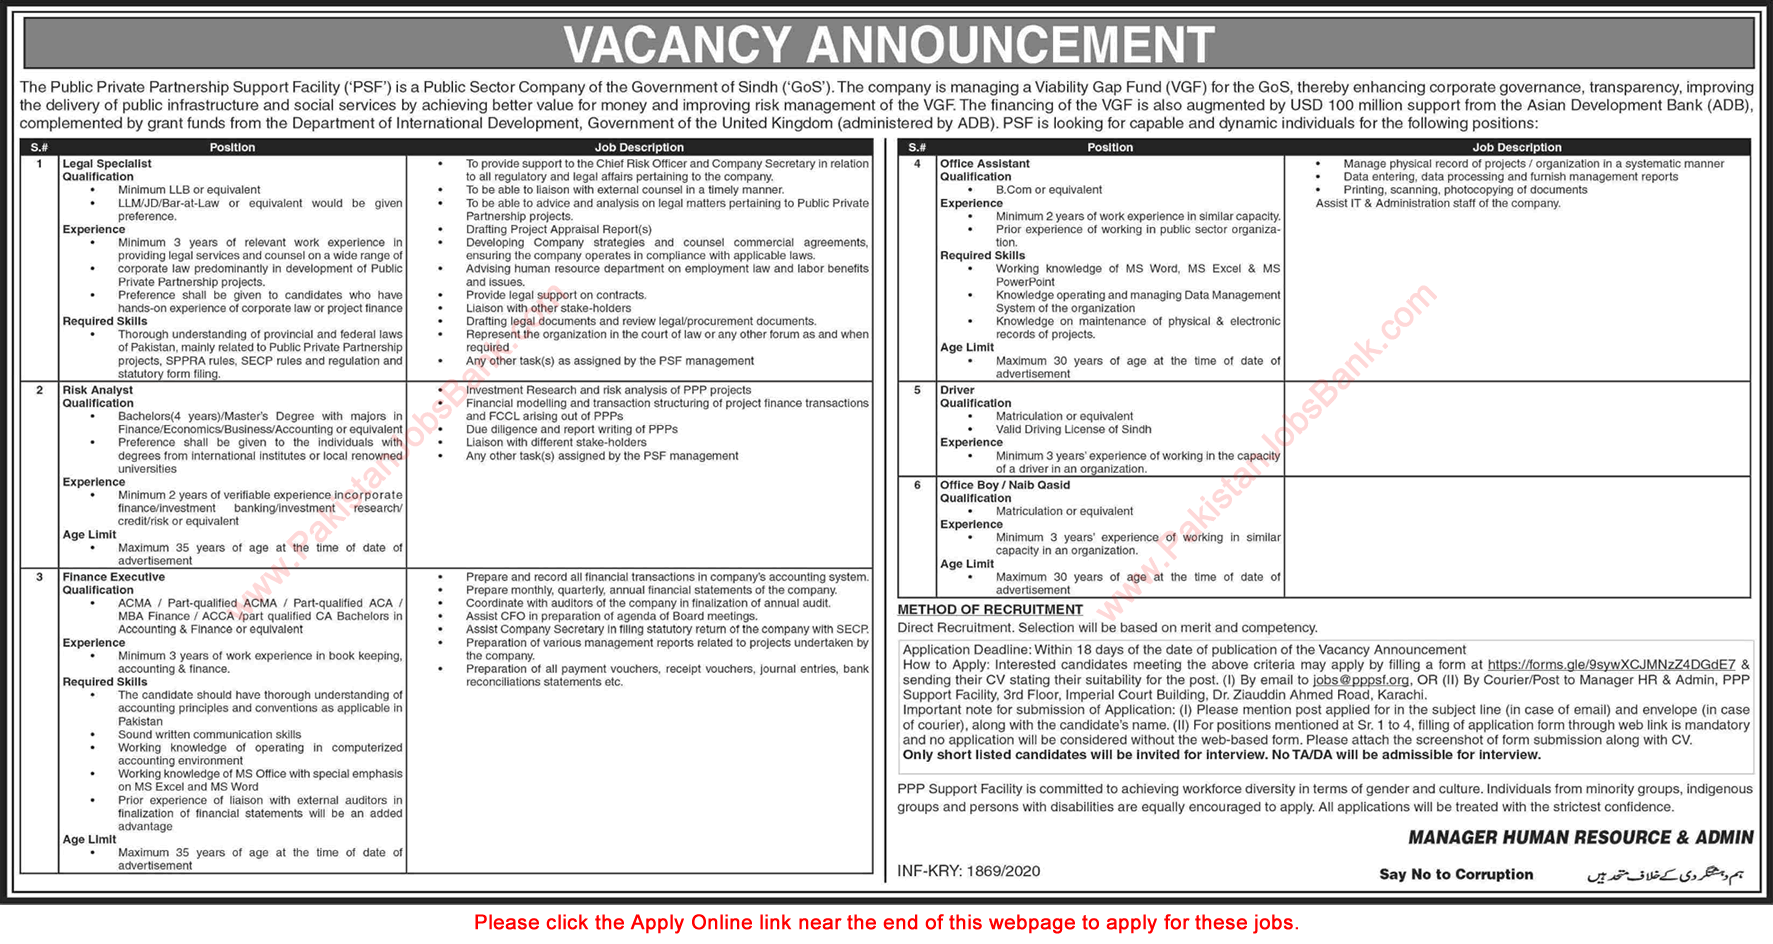 Public Private Partnership Support Facility Sindh Jobs 2020 July / August Apply Online Latest